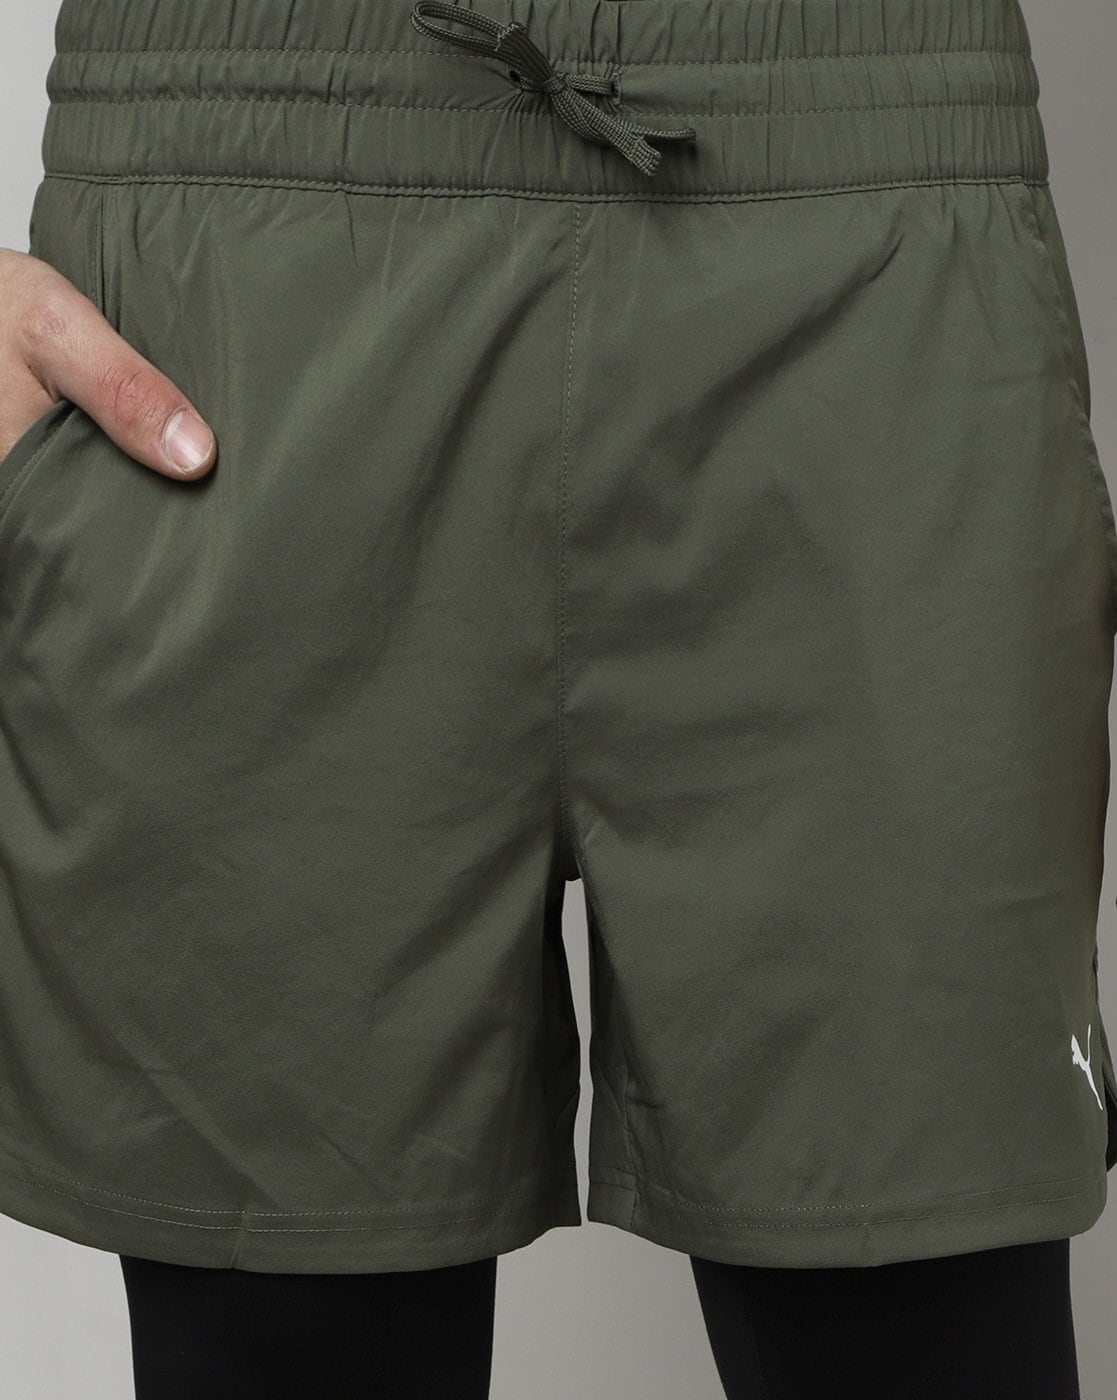 All In Motion Resort Short Solid Forest Green Shorts Hybrid Shorts NWT Size  XXL